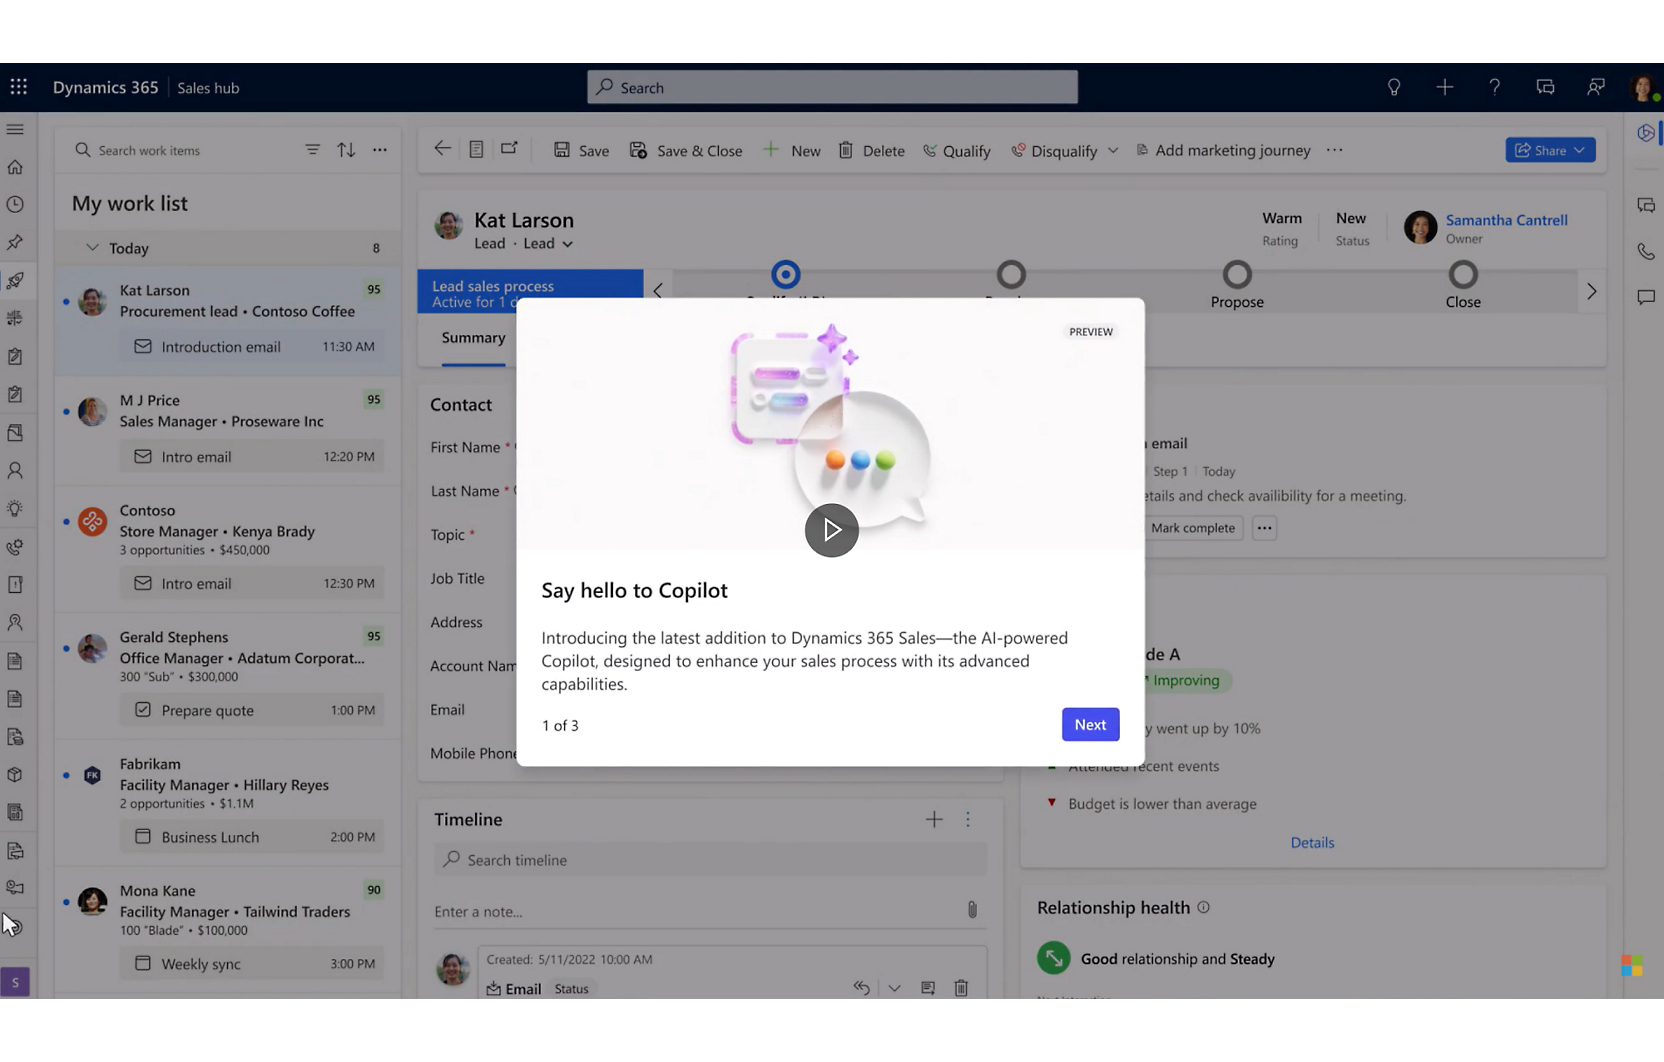 A screen shot of the Dynamics 365 dashboard and pop up for Copilot is opened